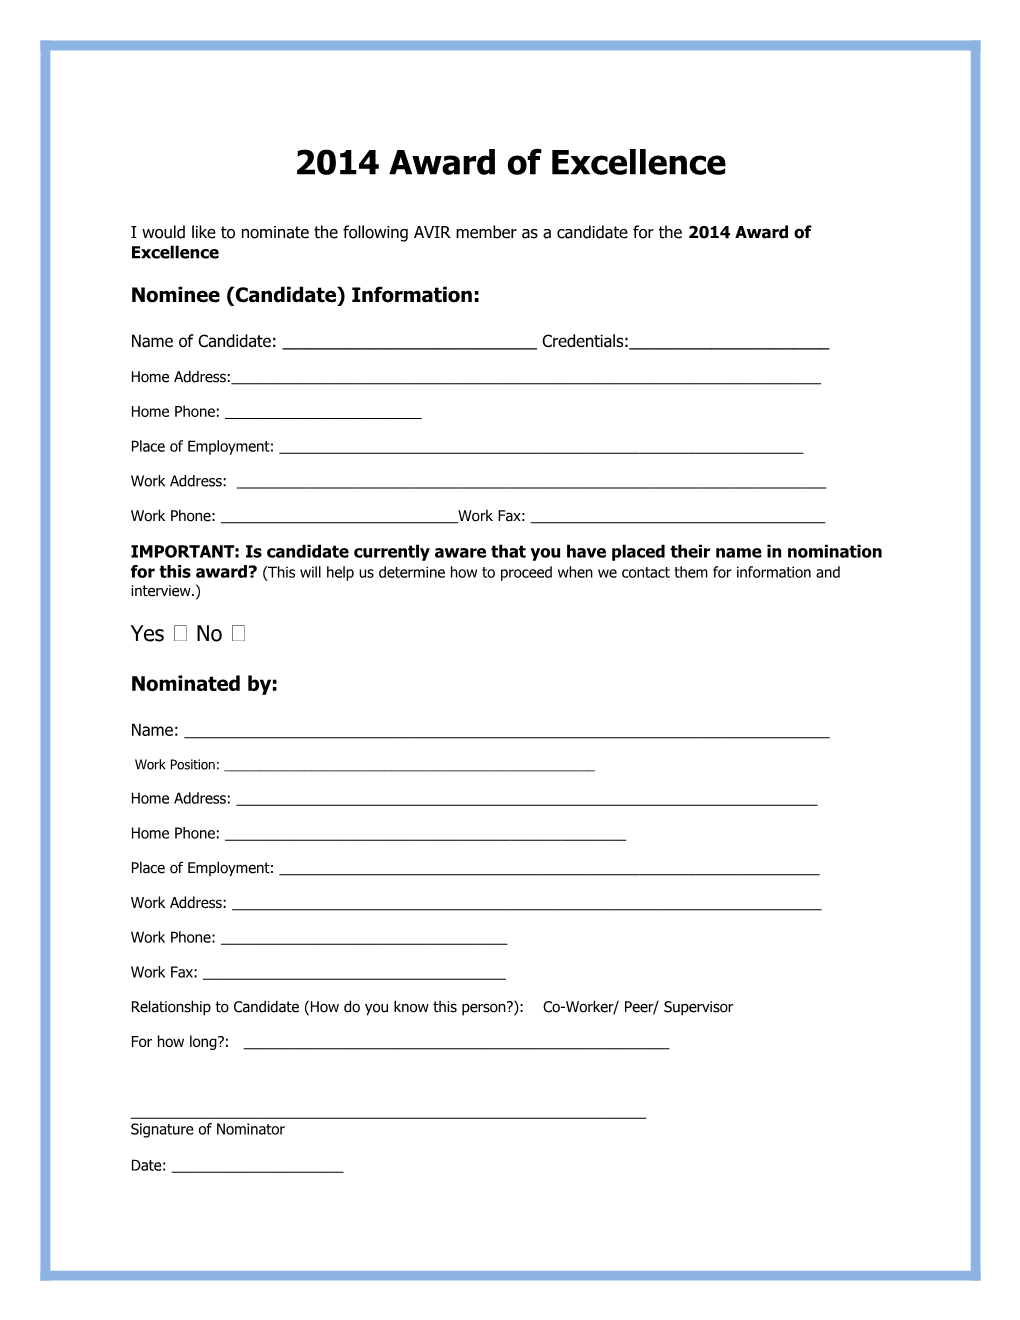 2014 Award of Excellence